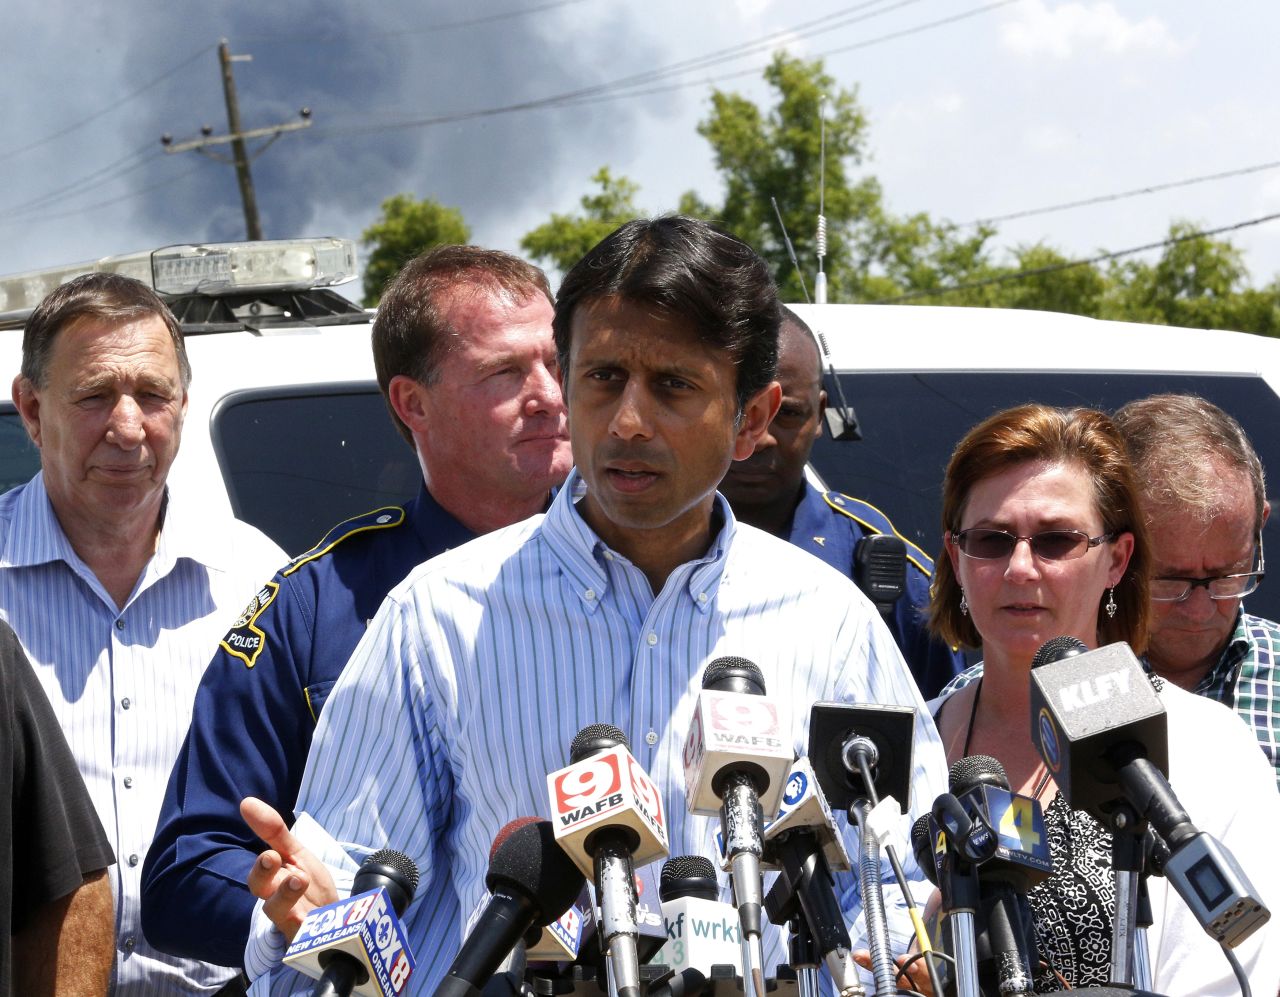 Smoke rises behind Louisiana Gov. Bobby Jindal as he talks about the explosion.